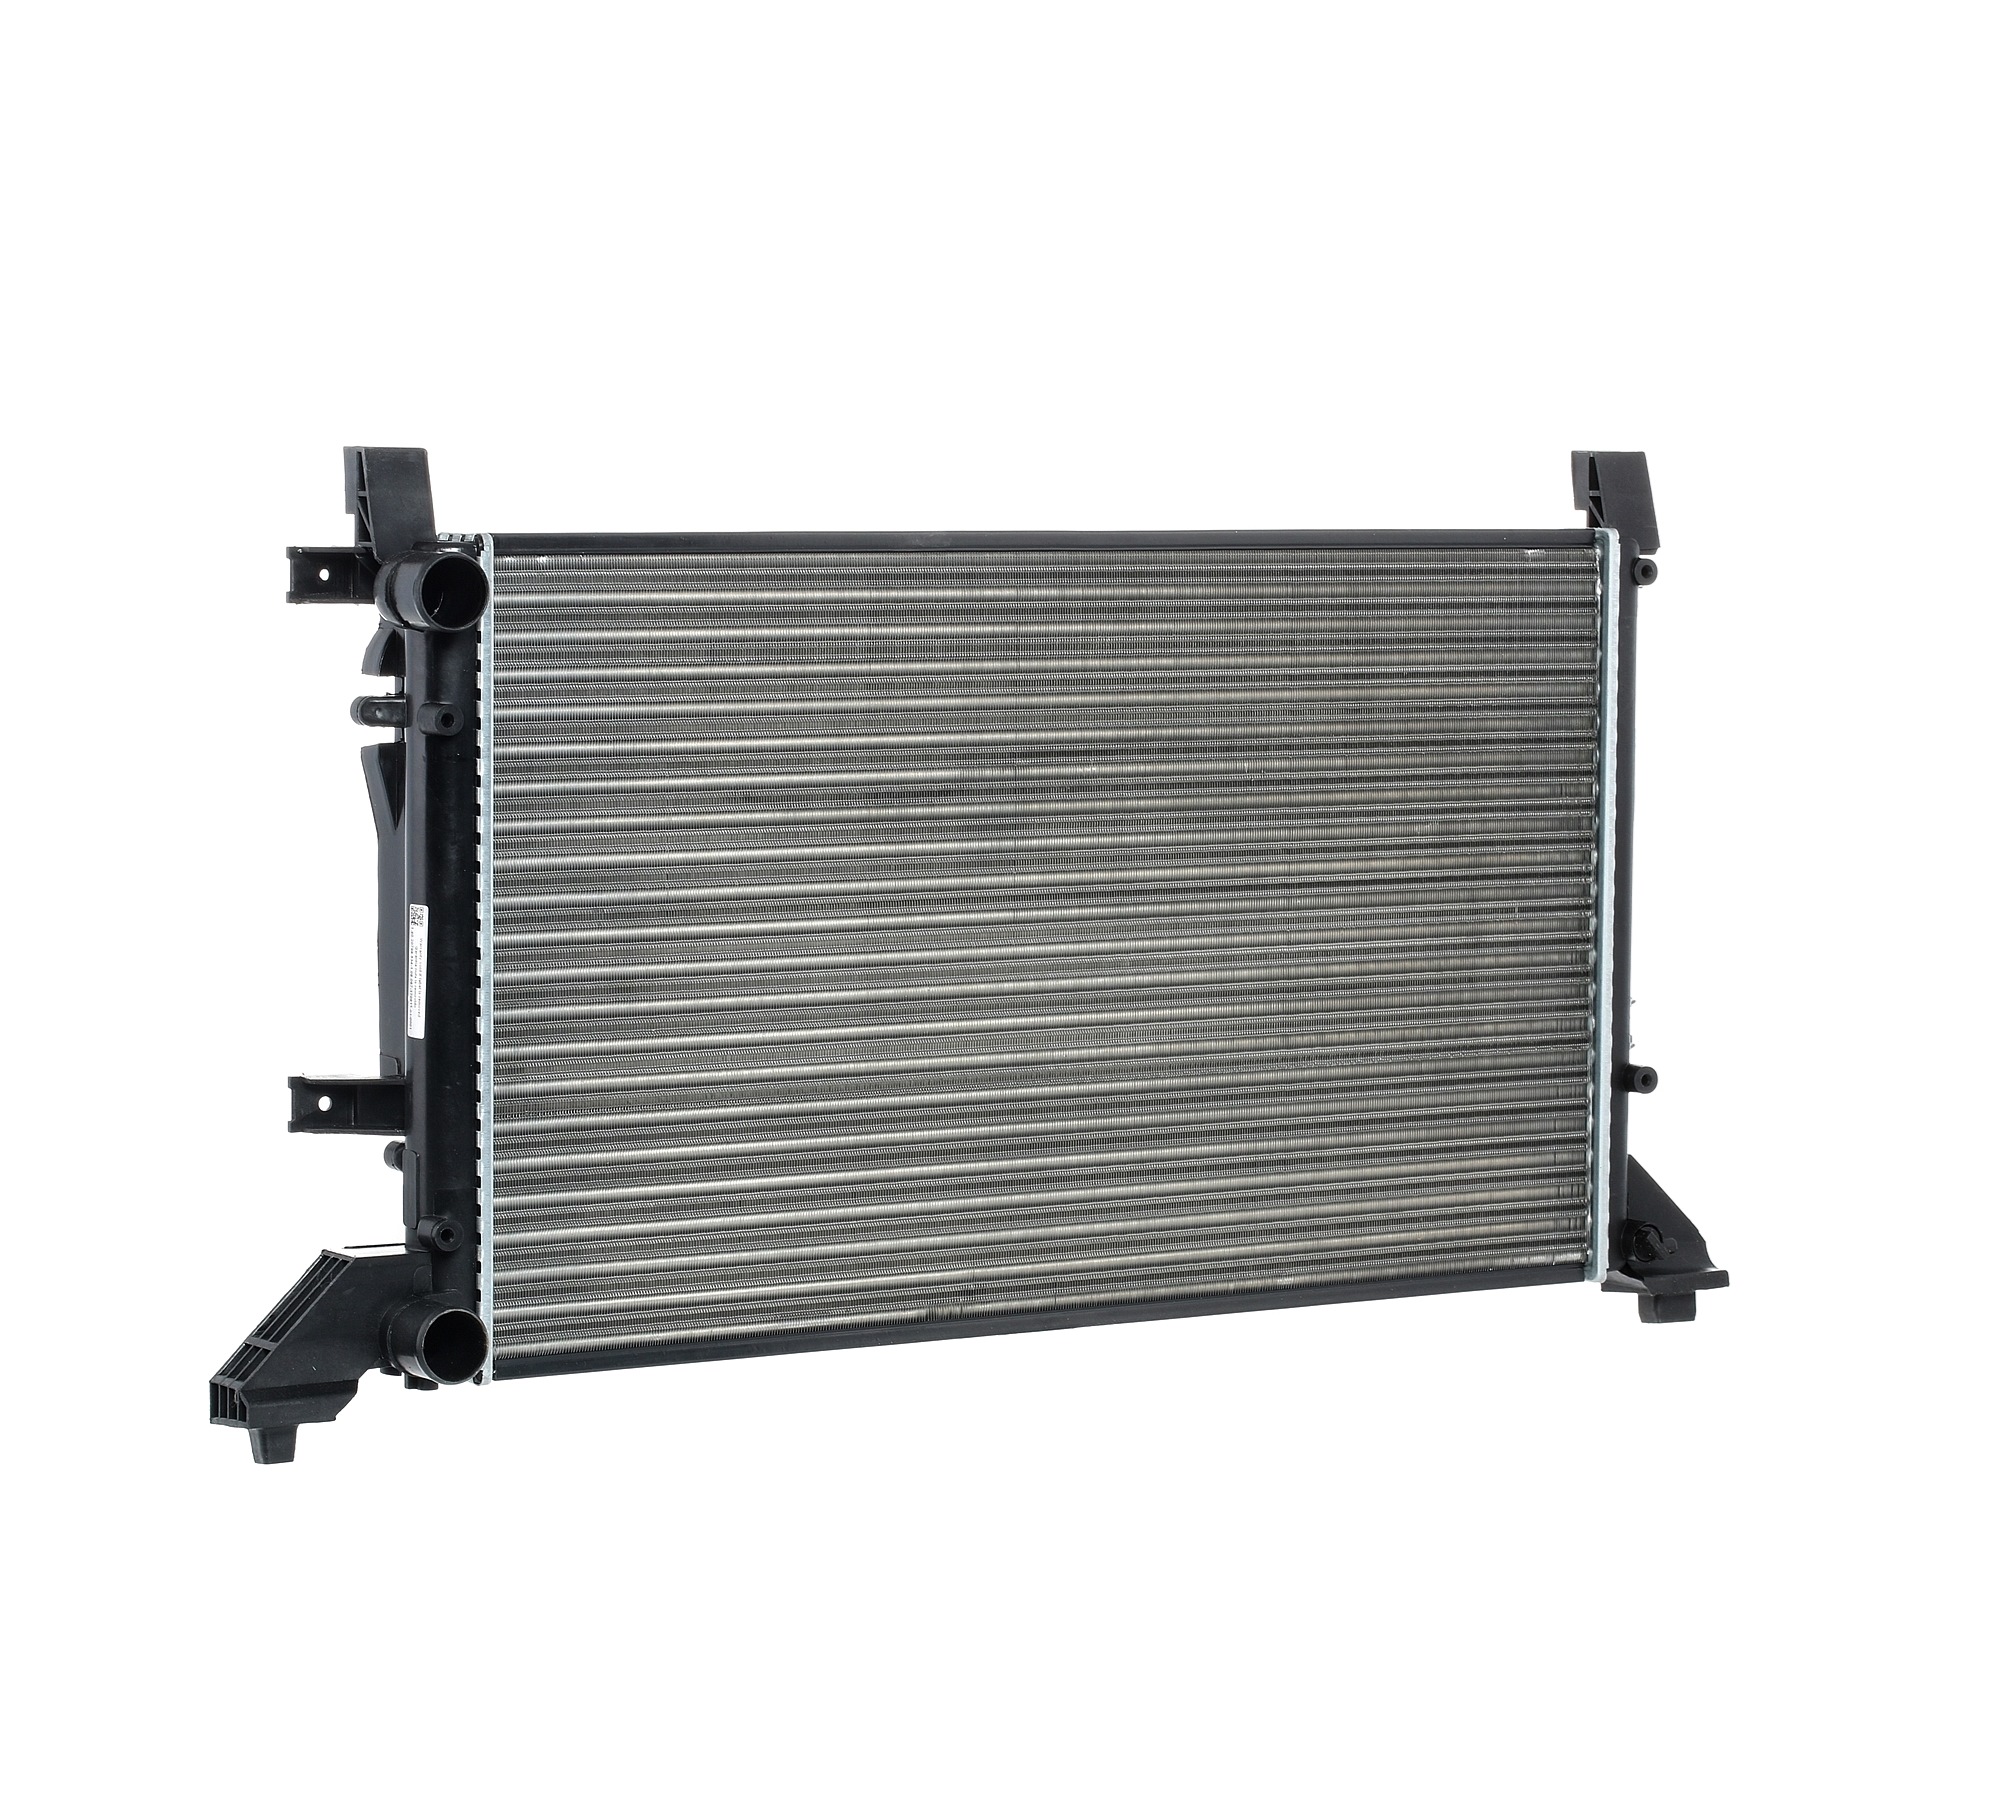 RIDEX 470R0132 Engine radiator Aluminium, Plastic, for vehicles without air conditioning, for vehicles with/without air conditioning, Manual Transmission